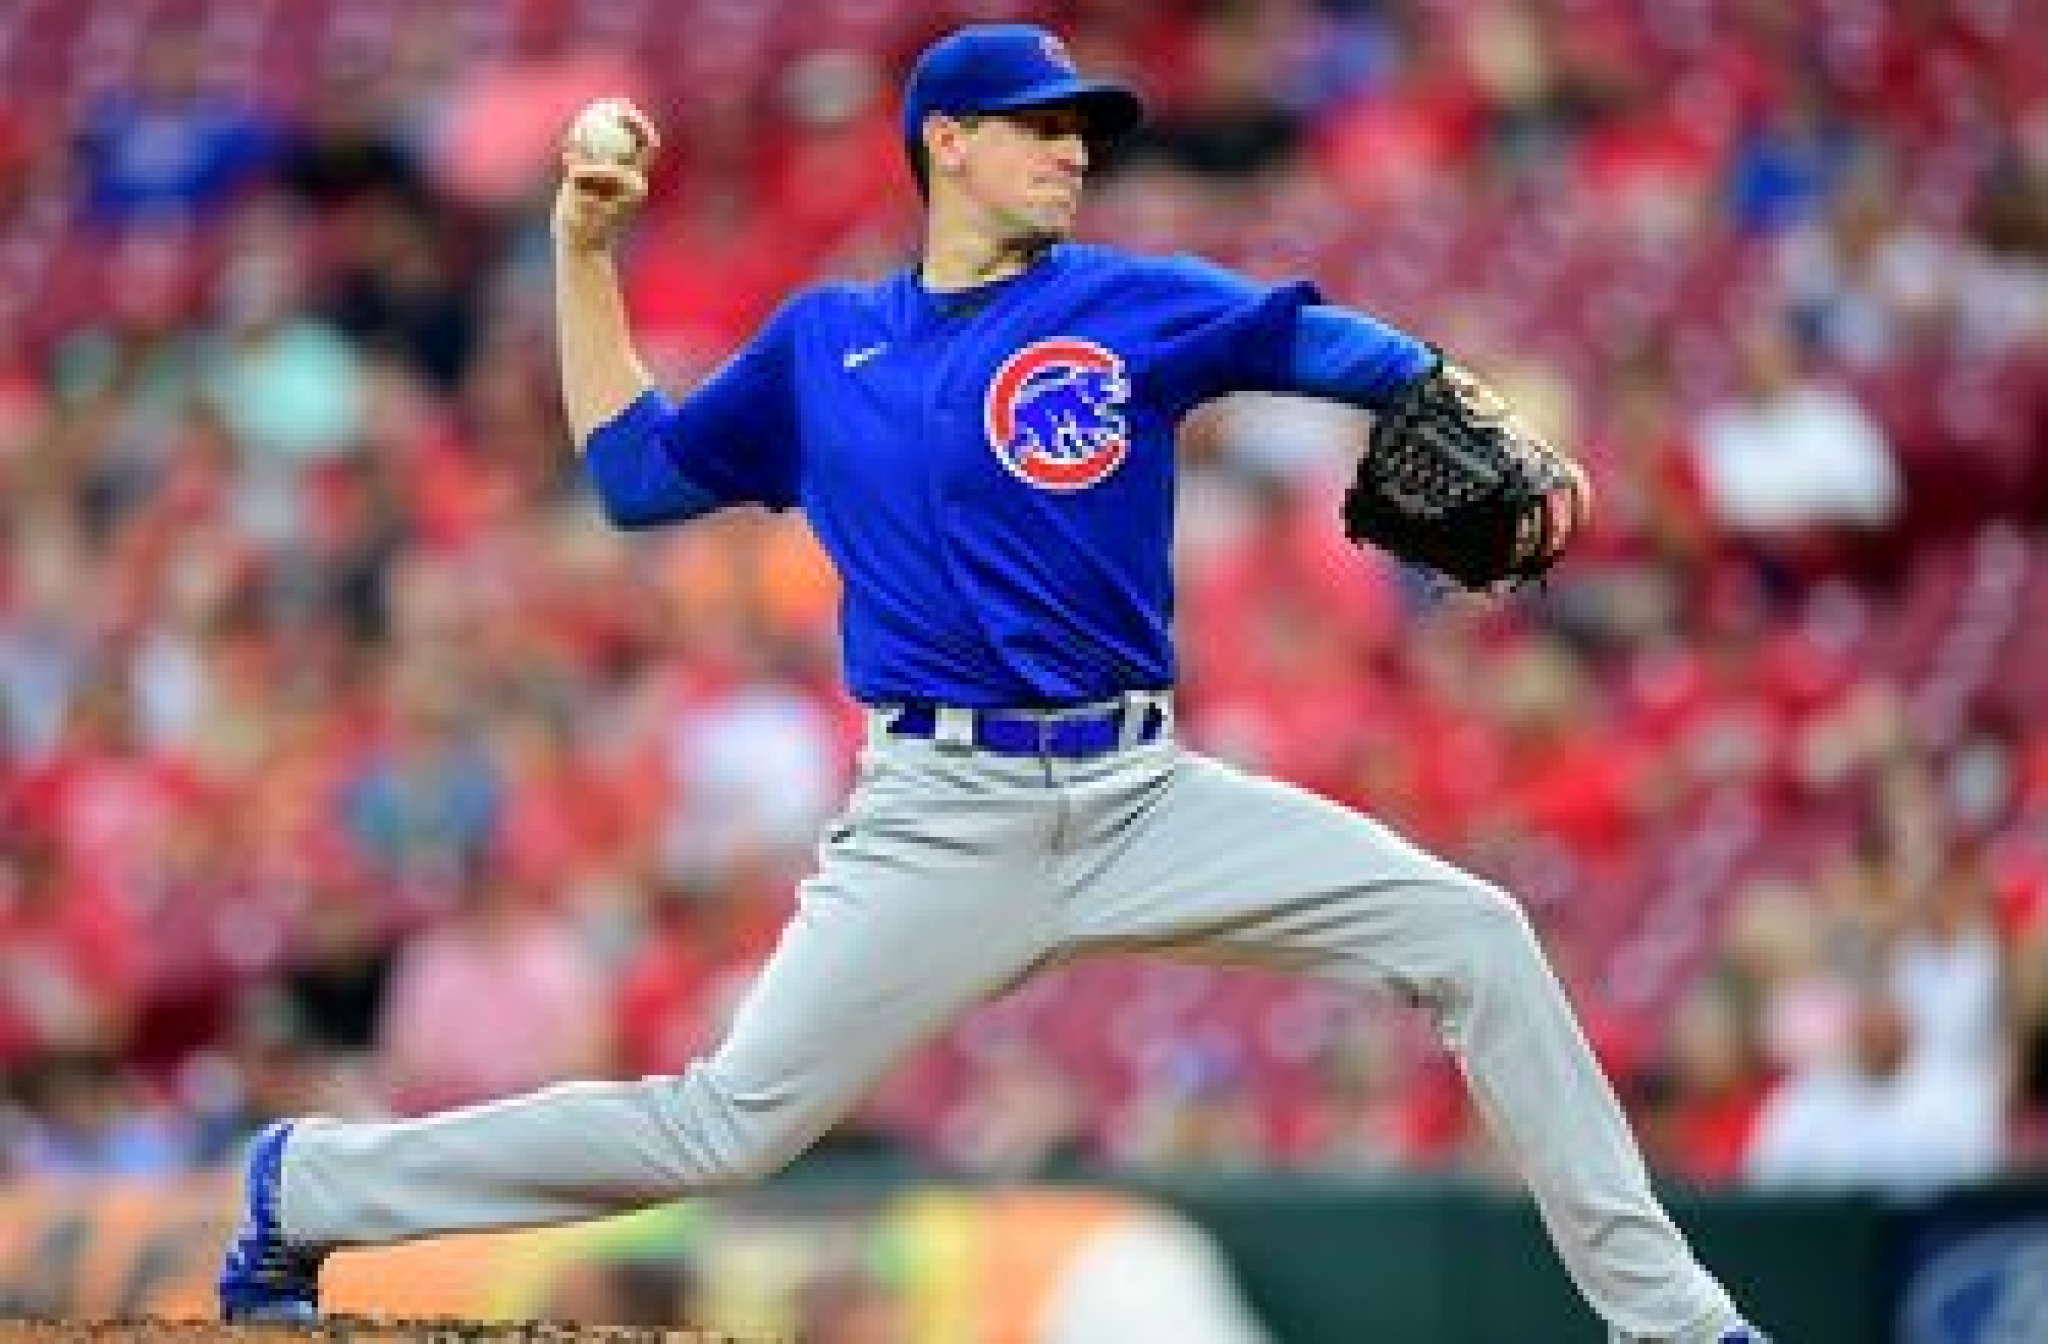 Kyle Hendricks earns league-leading 14th win as Cubs beat Reds, 2-1